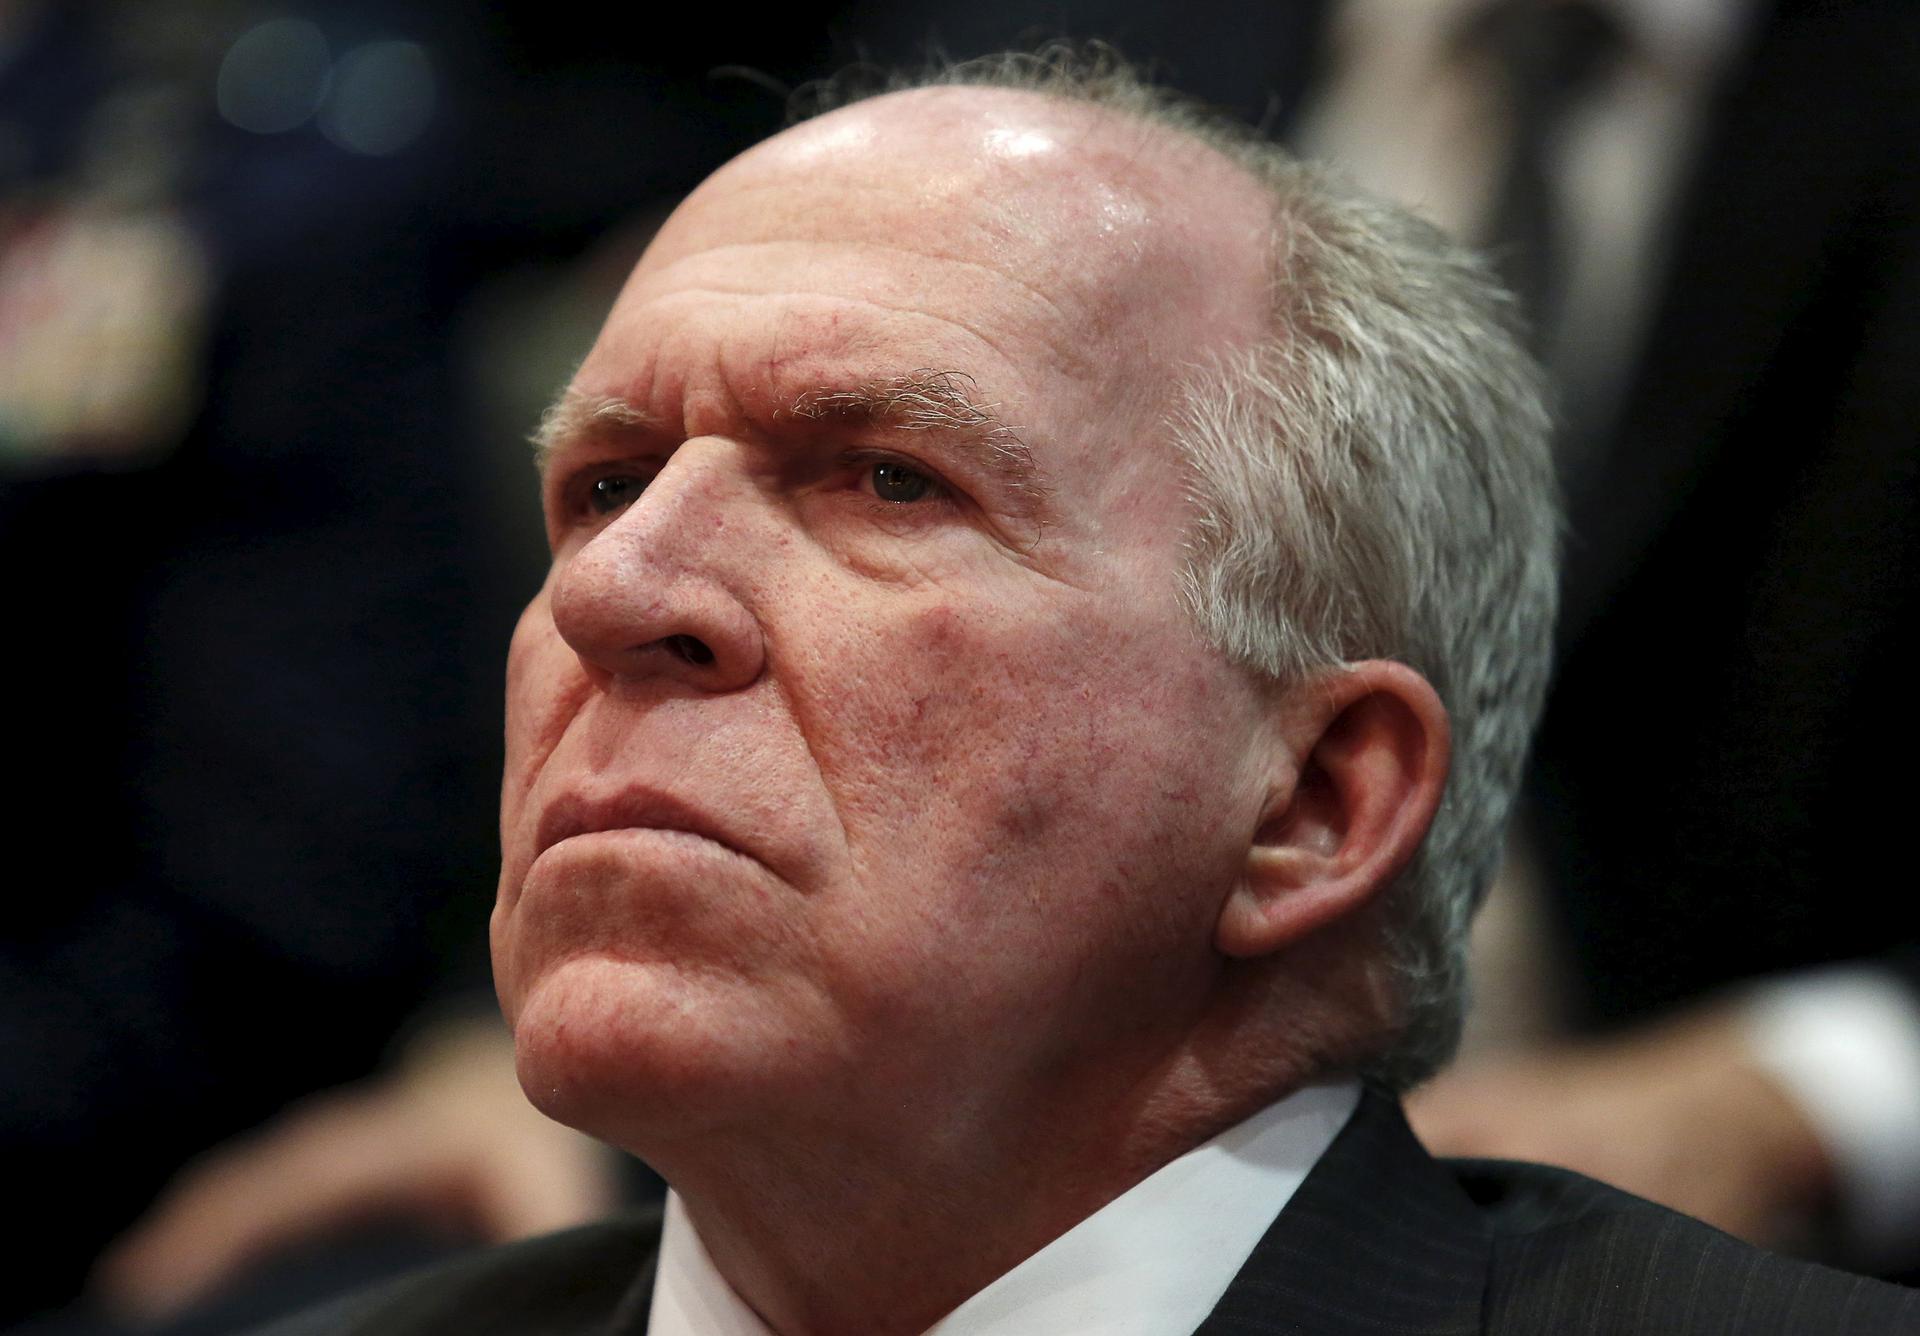 CIA director John Brennan's emails may have been hacked. Photo: Reuters